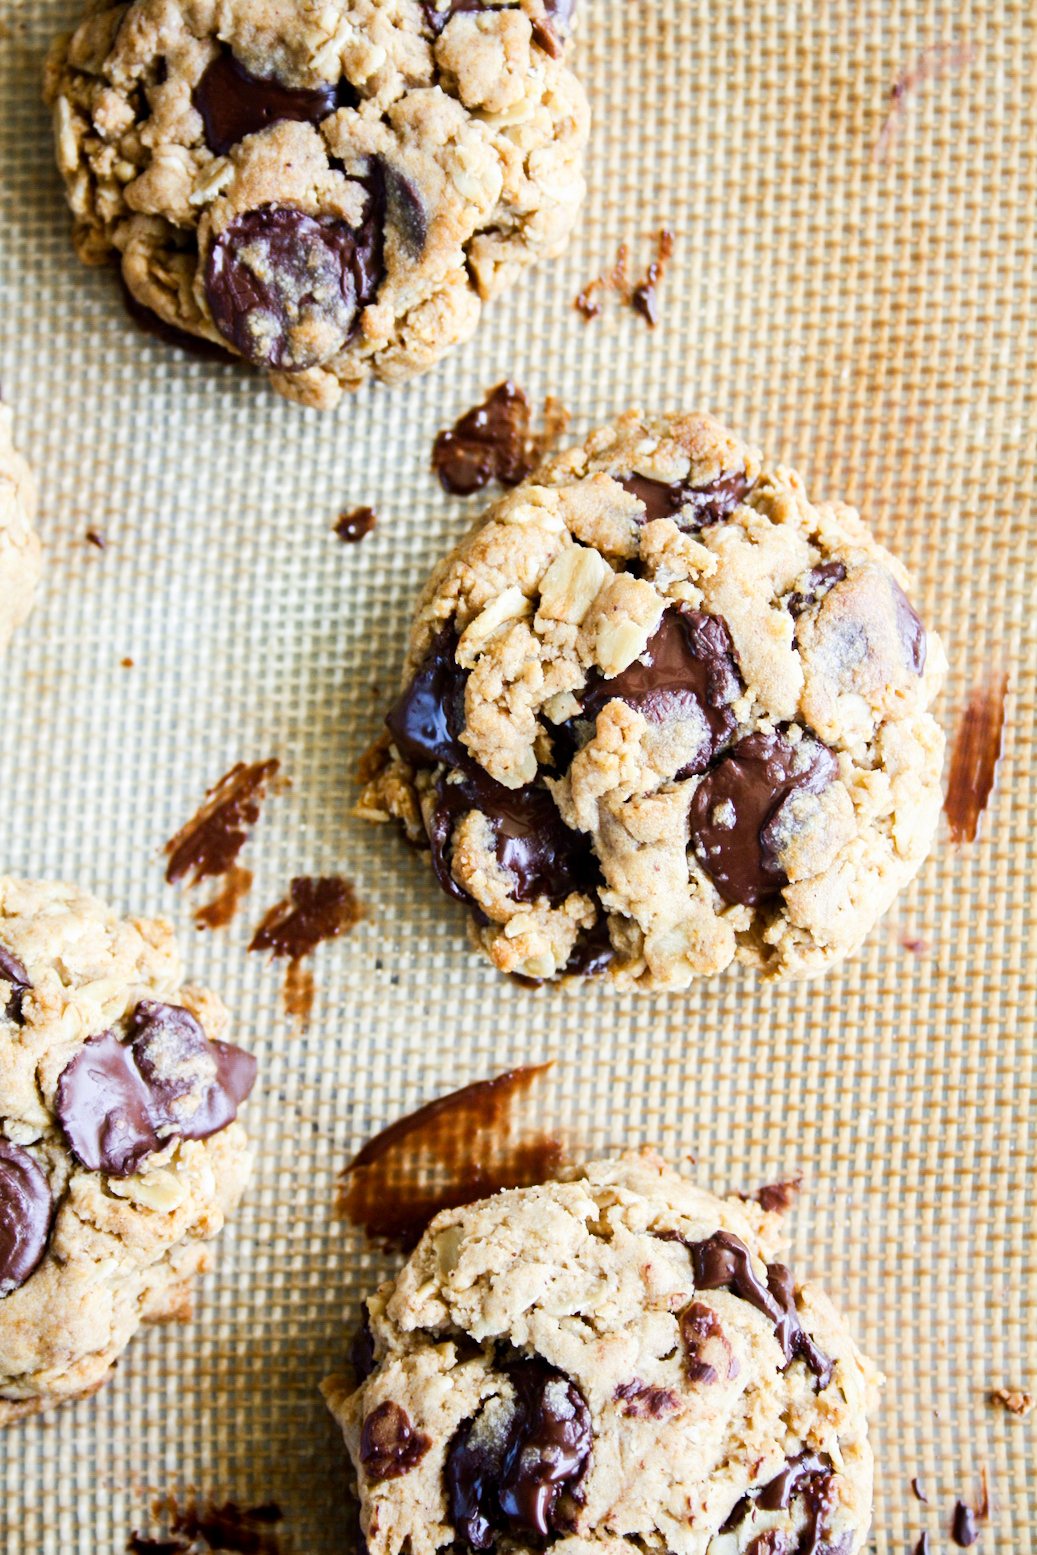 Chewy wholewheat chocolate chip cookies with rolled oats and no eggs